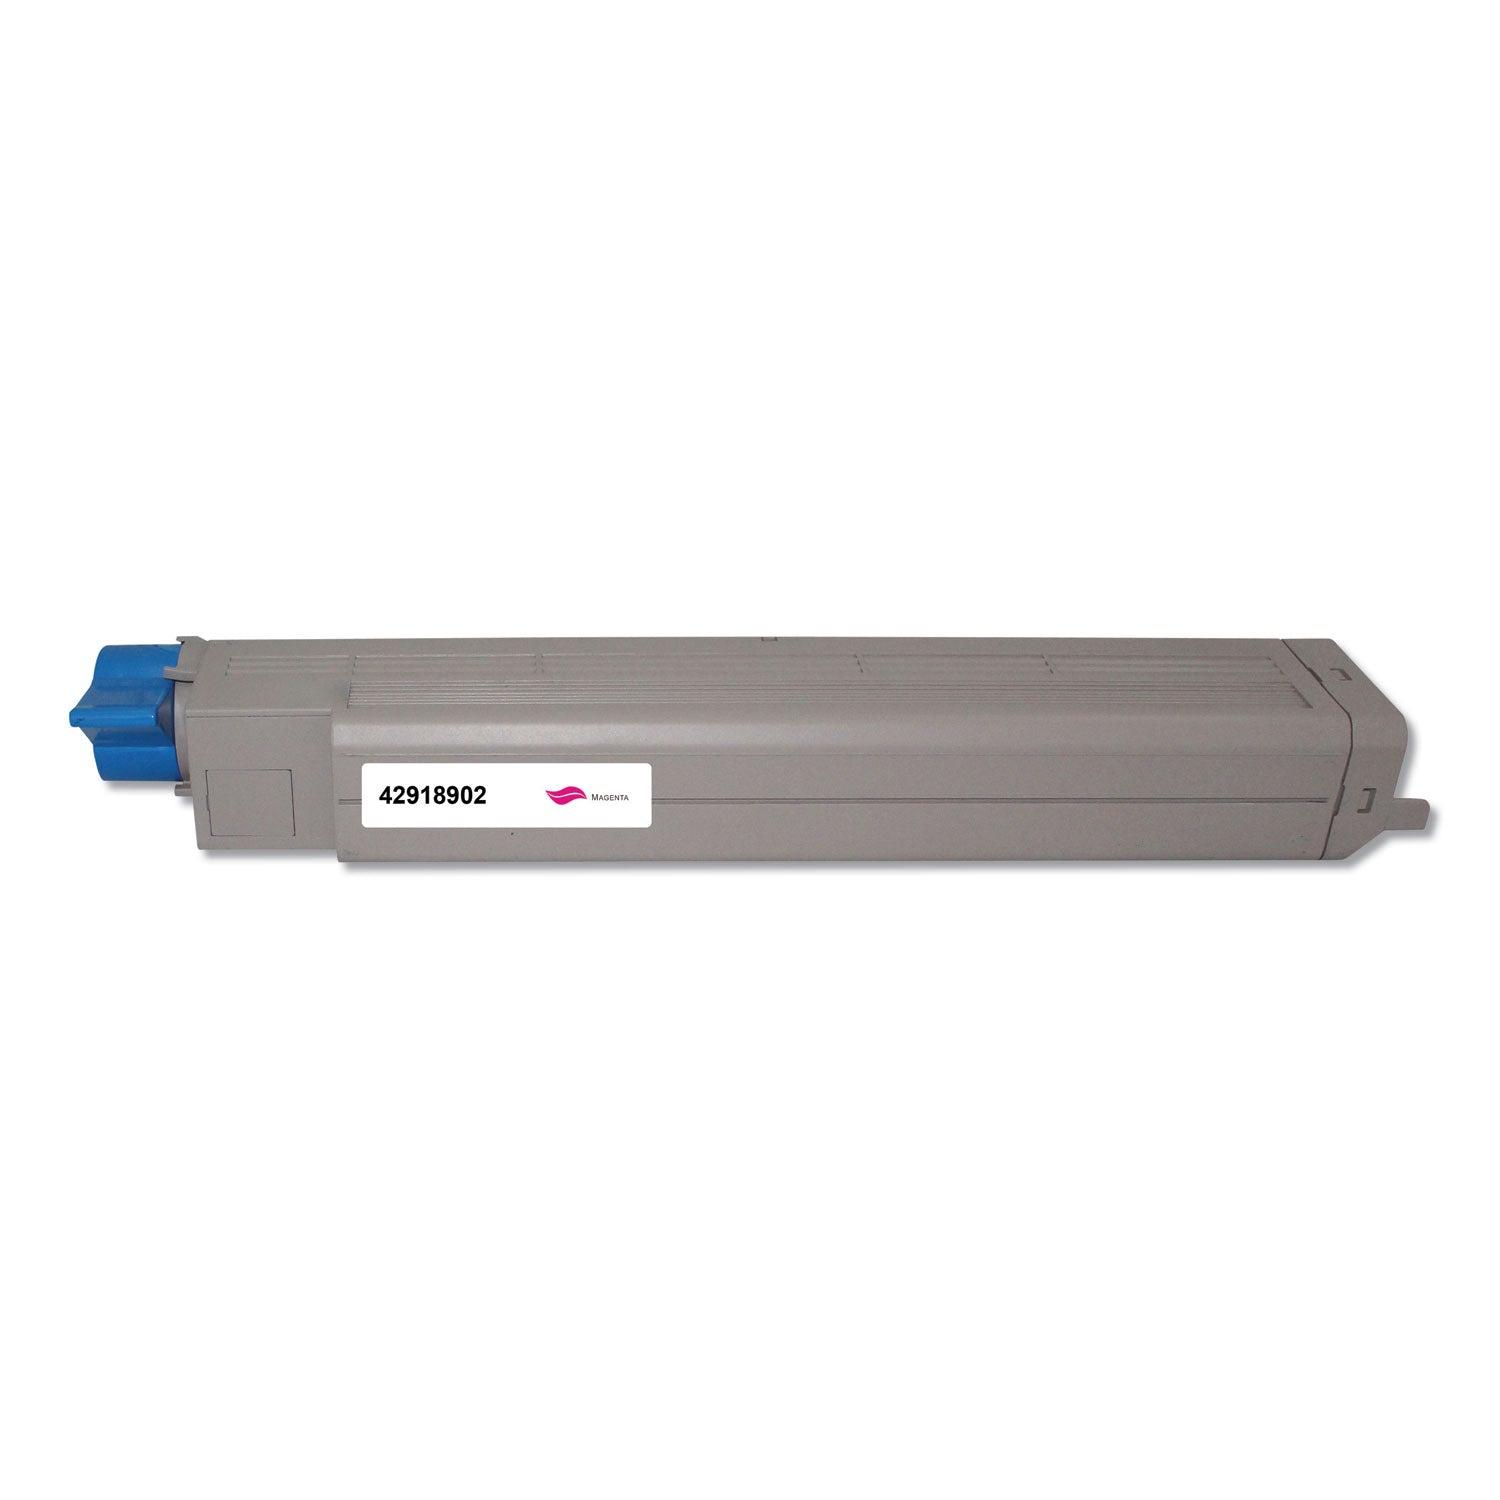 remanufactured-magenta-toner-type-c7-replacement-for-42918902-15000-page-yield_ivr42918902 - 2